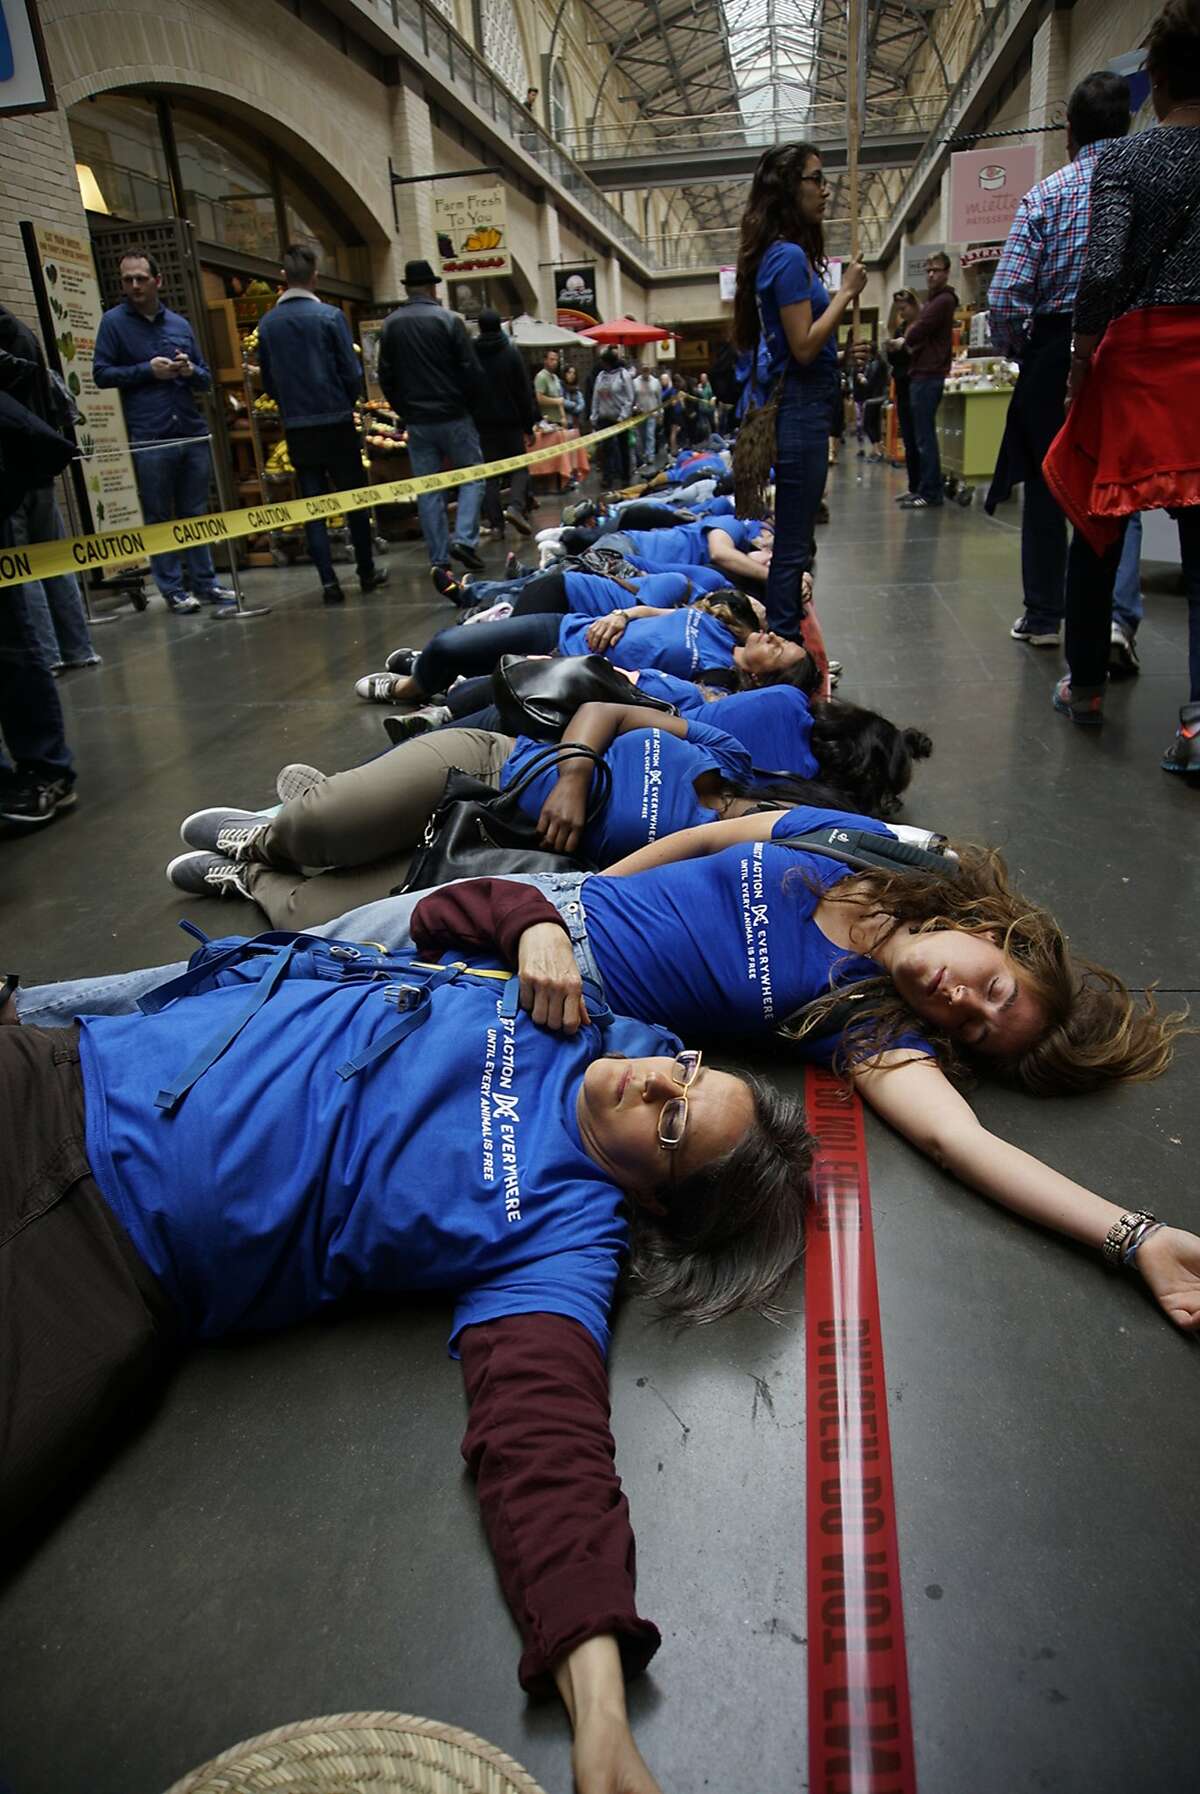 Anita Krajnc (foreground) lay with 350 people of Direct Action Everywhere, spanning the full length of the Ferry Building, in what they describe as a "die-in" on Sunday, May 28 2017 in San Francisco, CA.